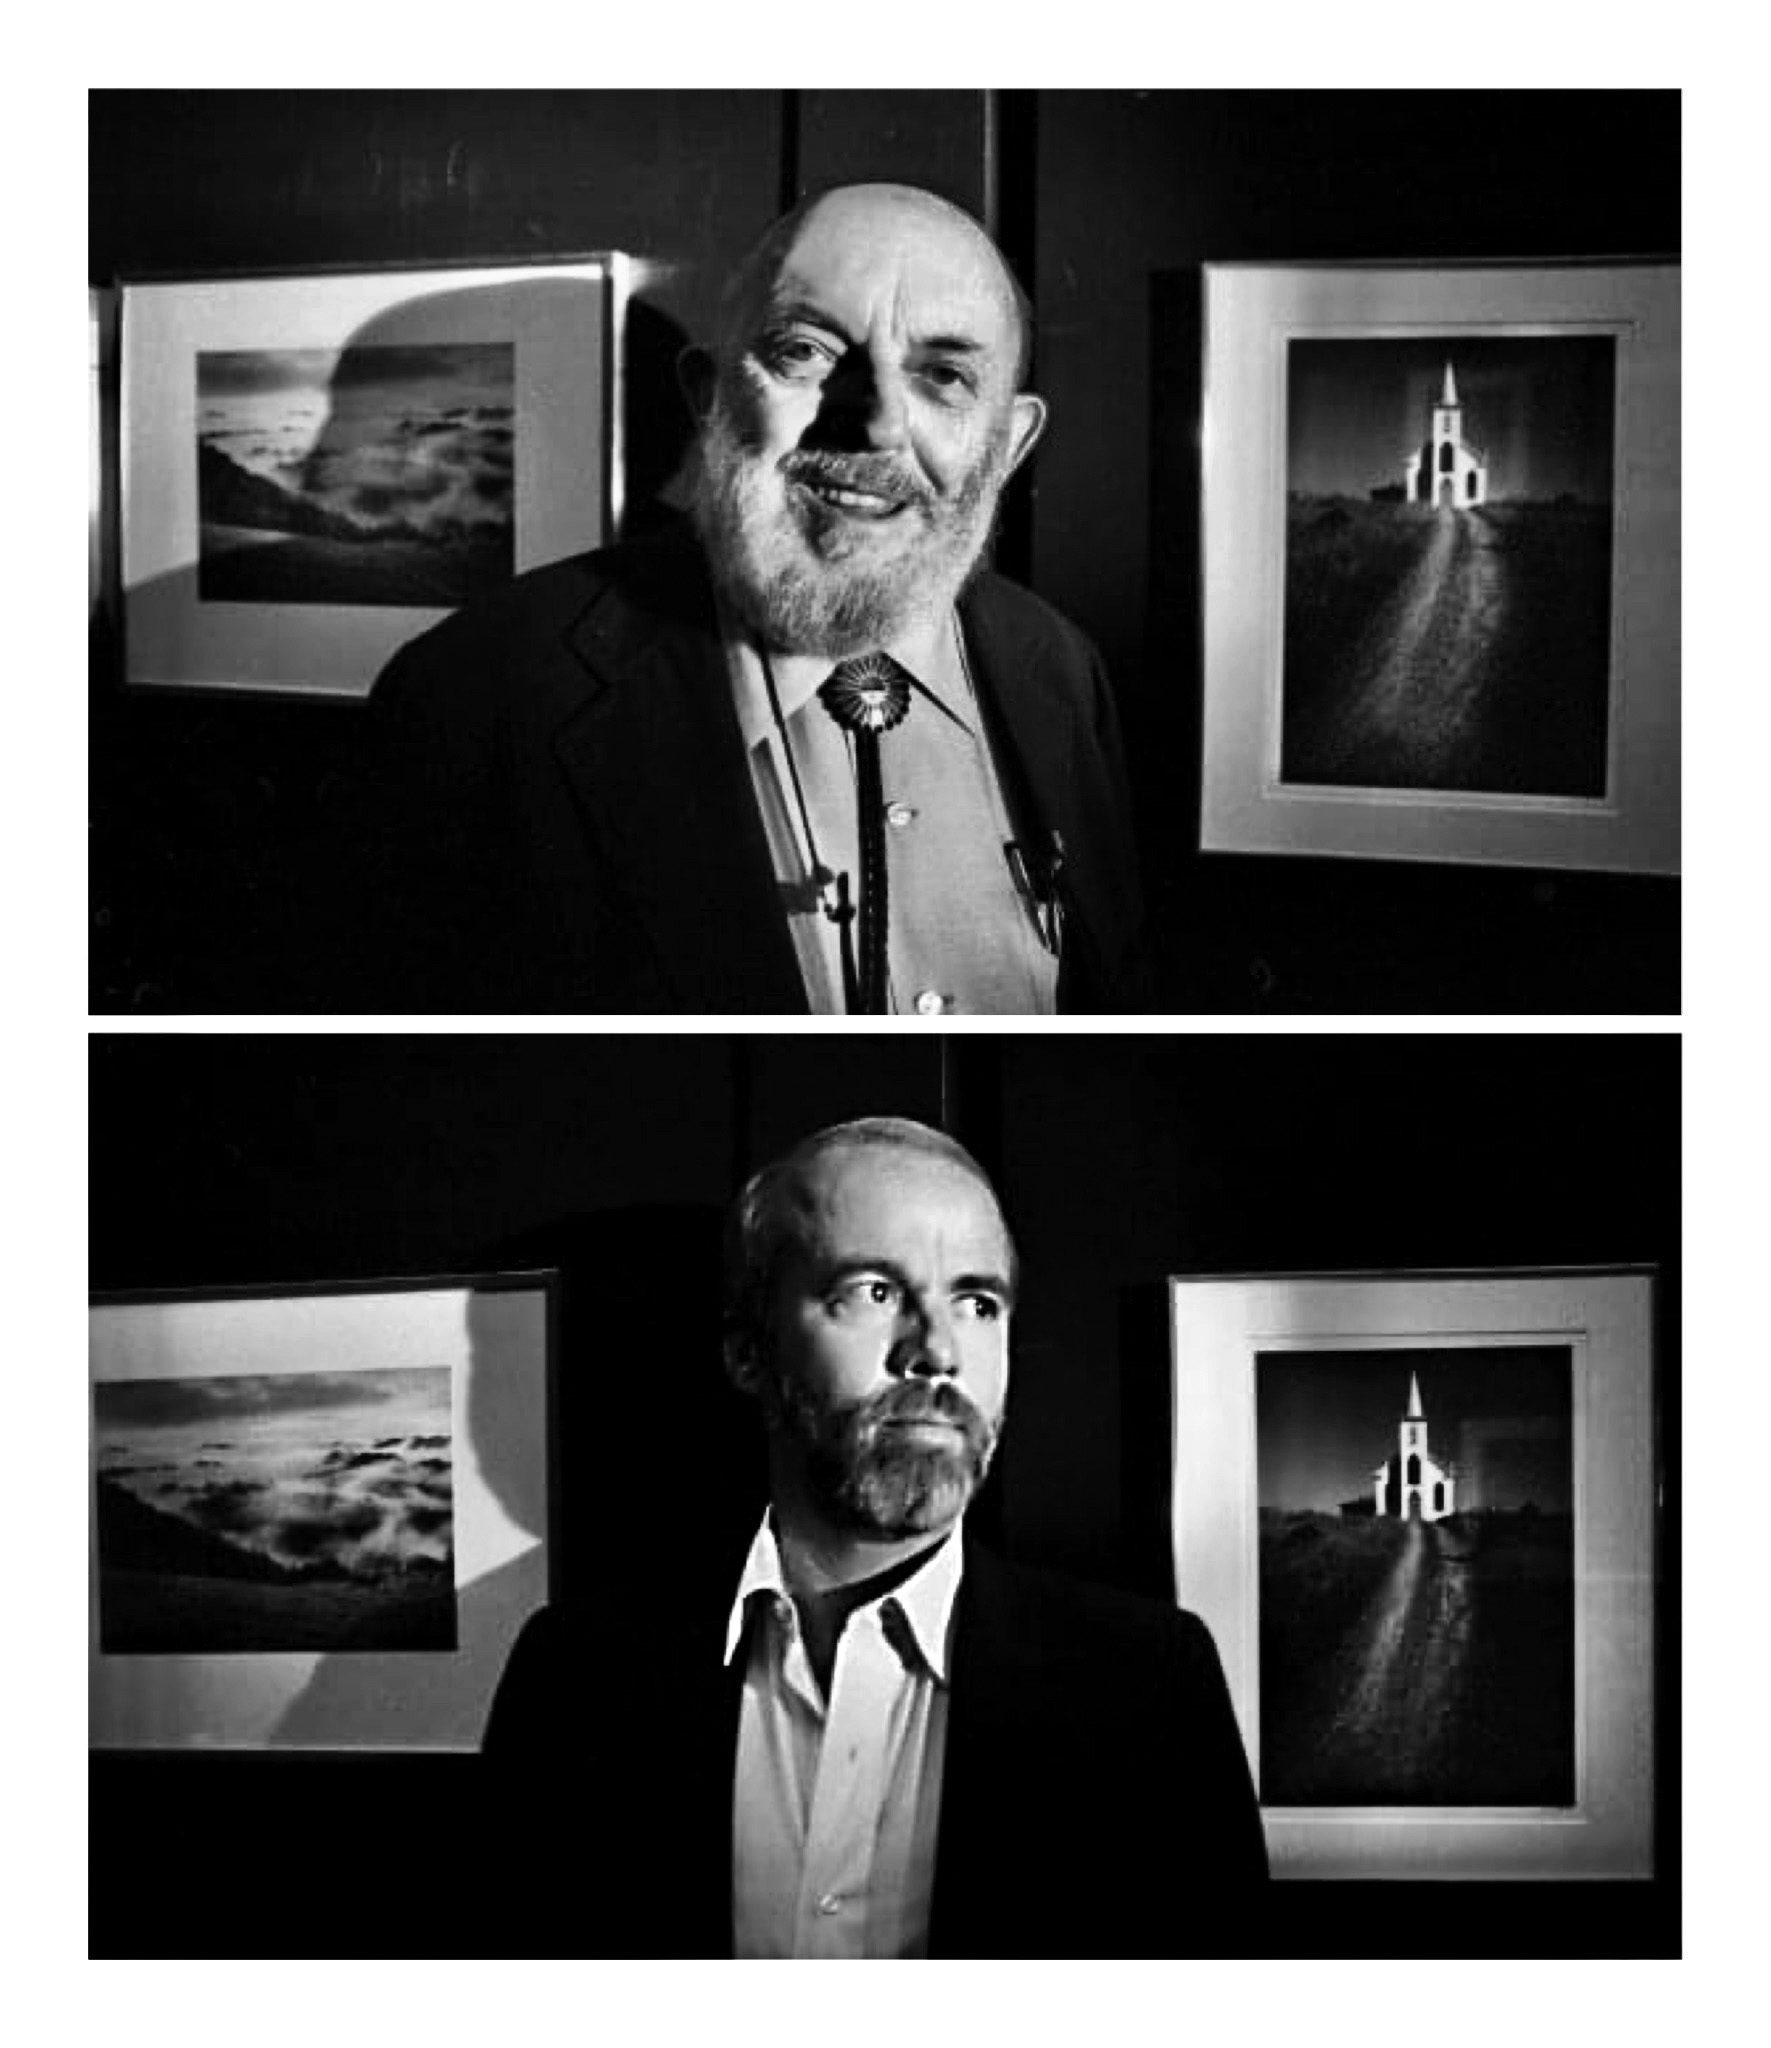 Adams by Kennerly, Kennerly by Adams at Ansel’s Carmel home in 1981. The background features two of AA’s photos.